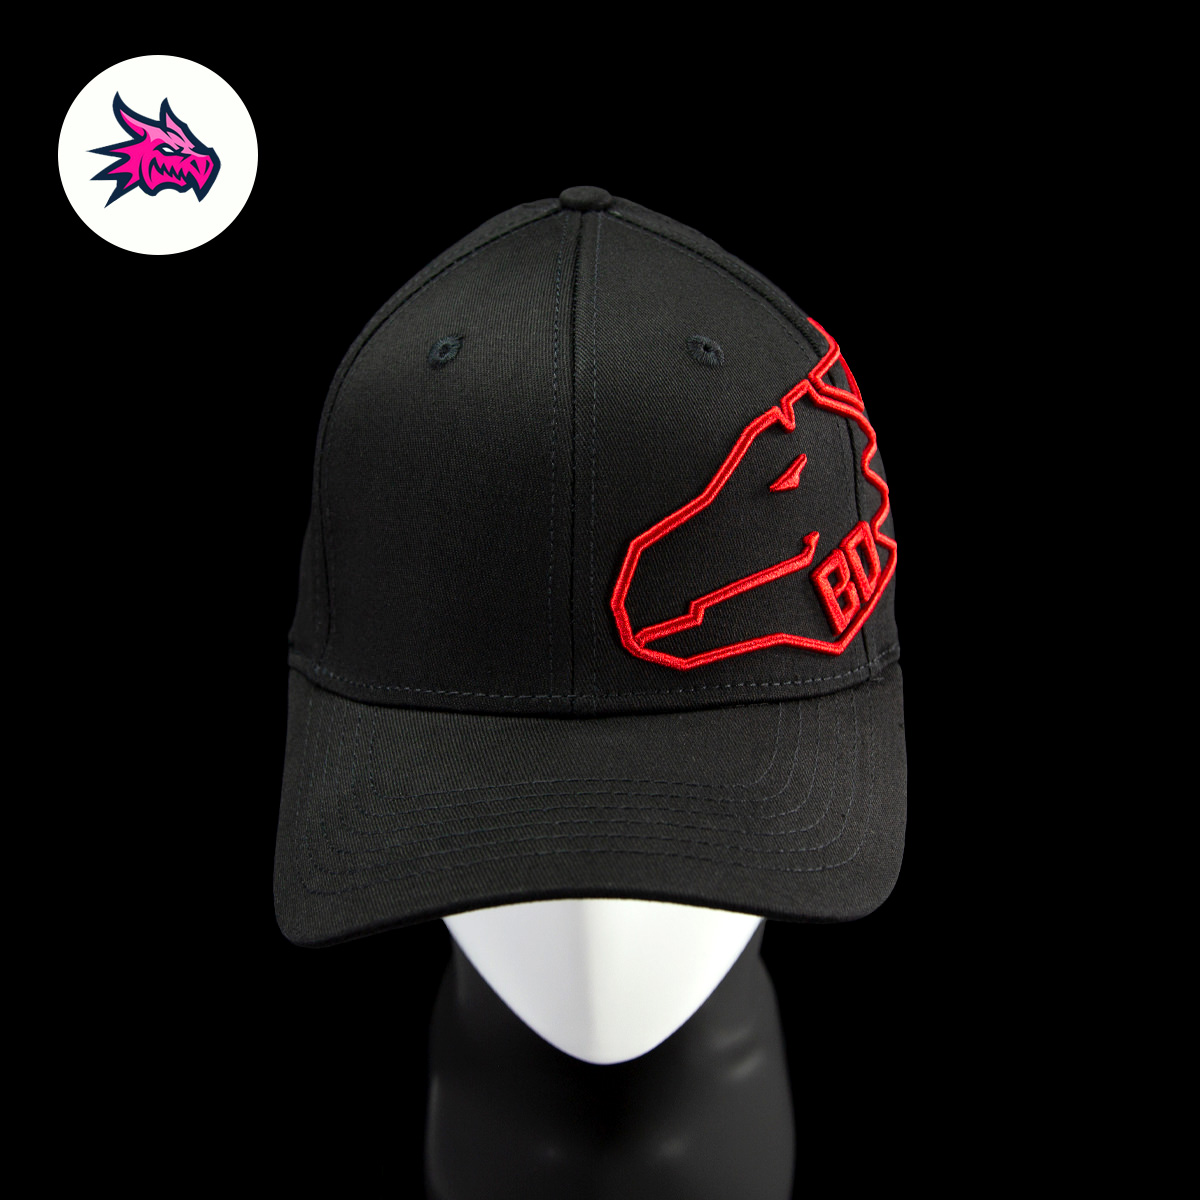 Gorgeous Bad Dragon clothing with branded black and red caps